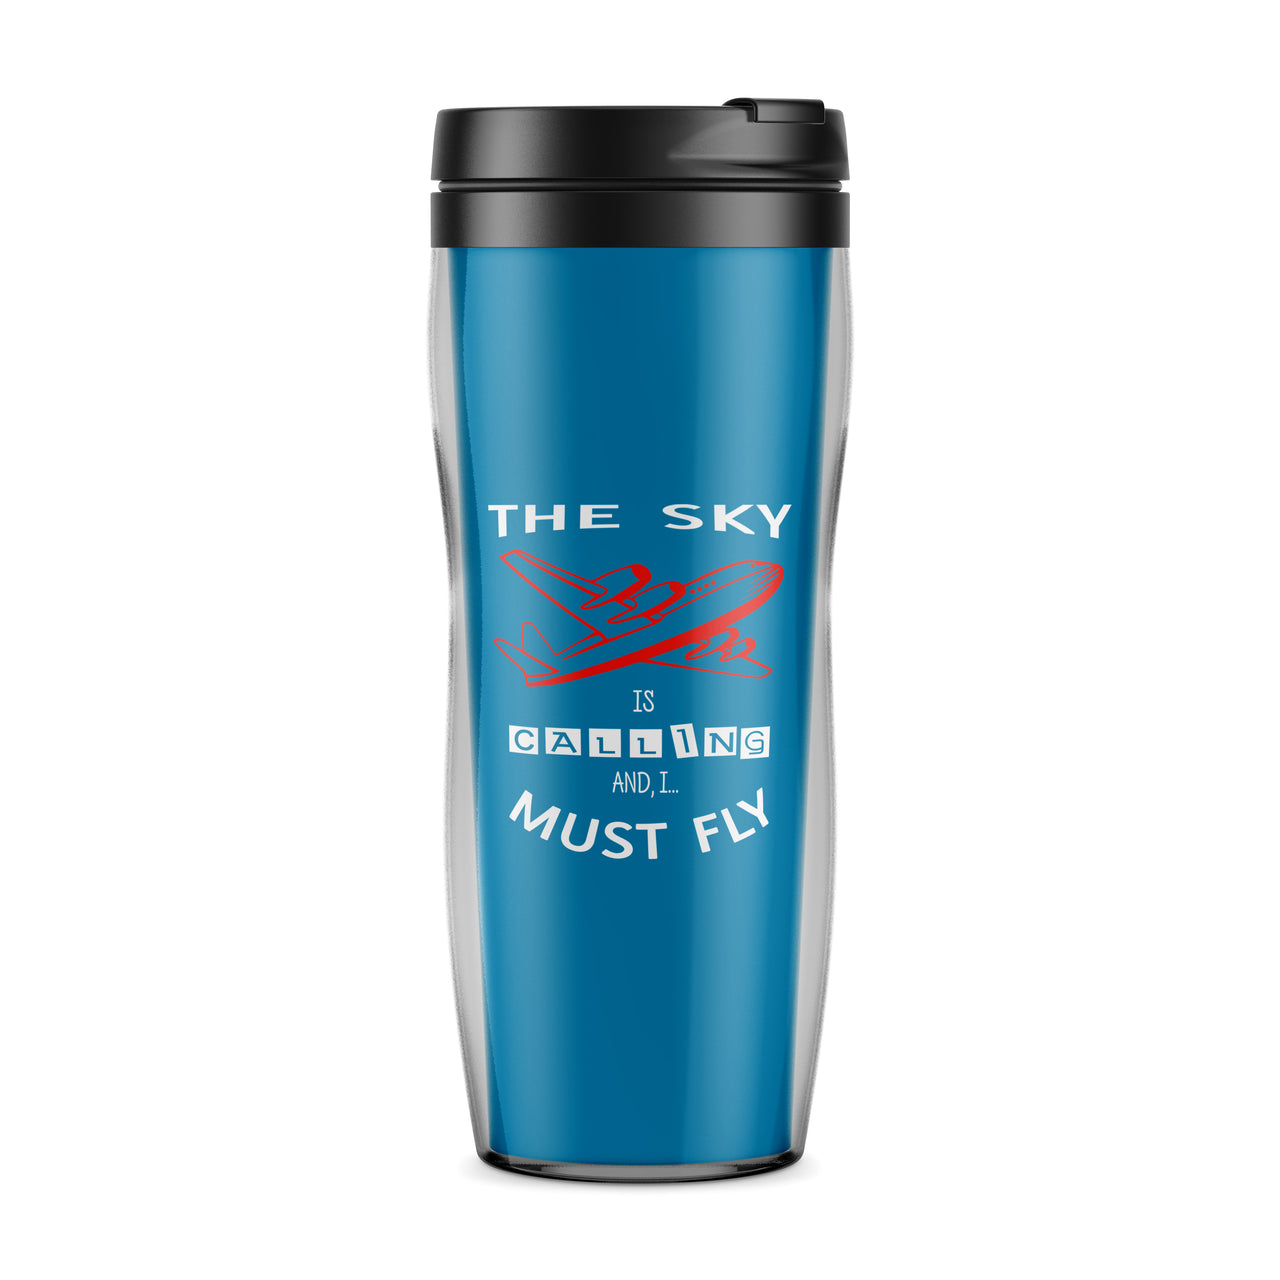 The Sky is Calling and I Must Fly Designed Travel Mugs